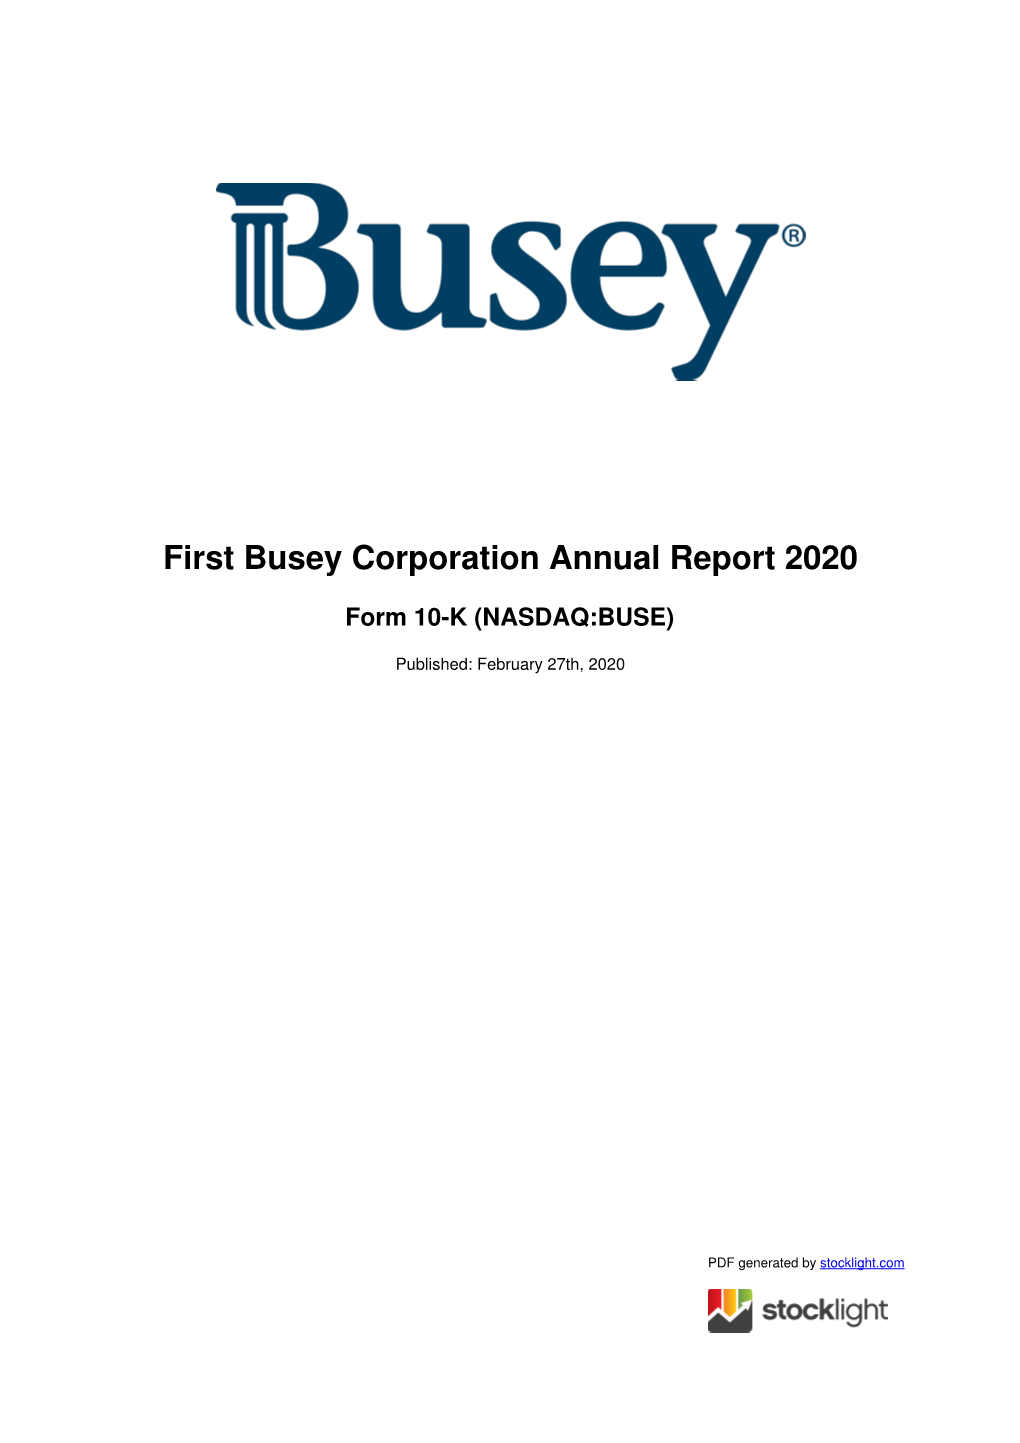 First Busey Corporation Annual Report 2020